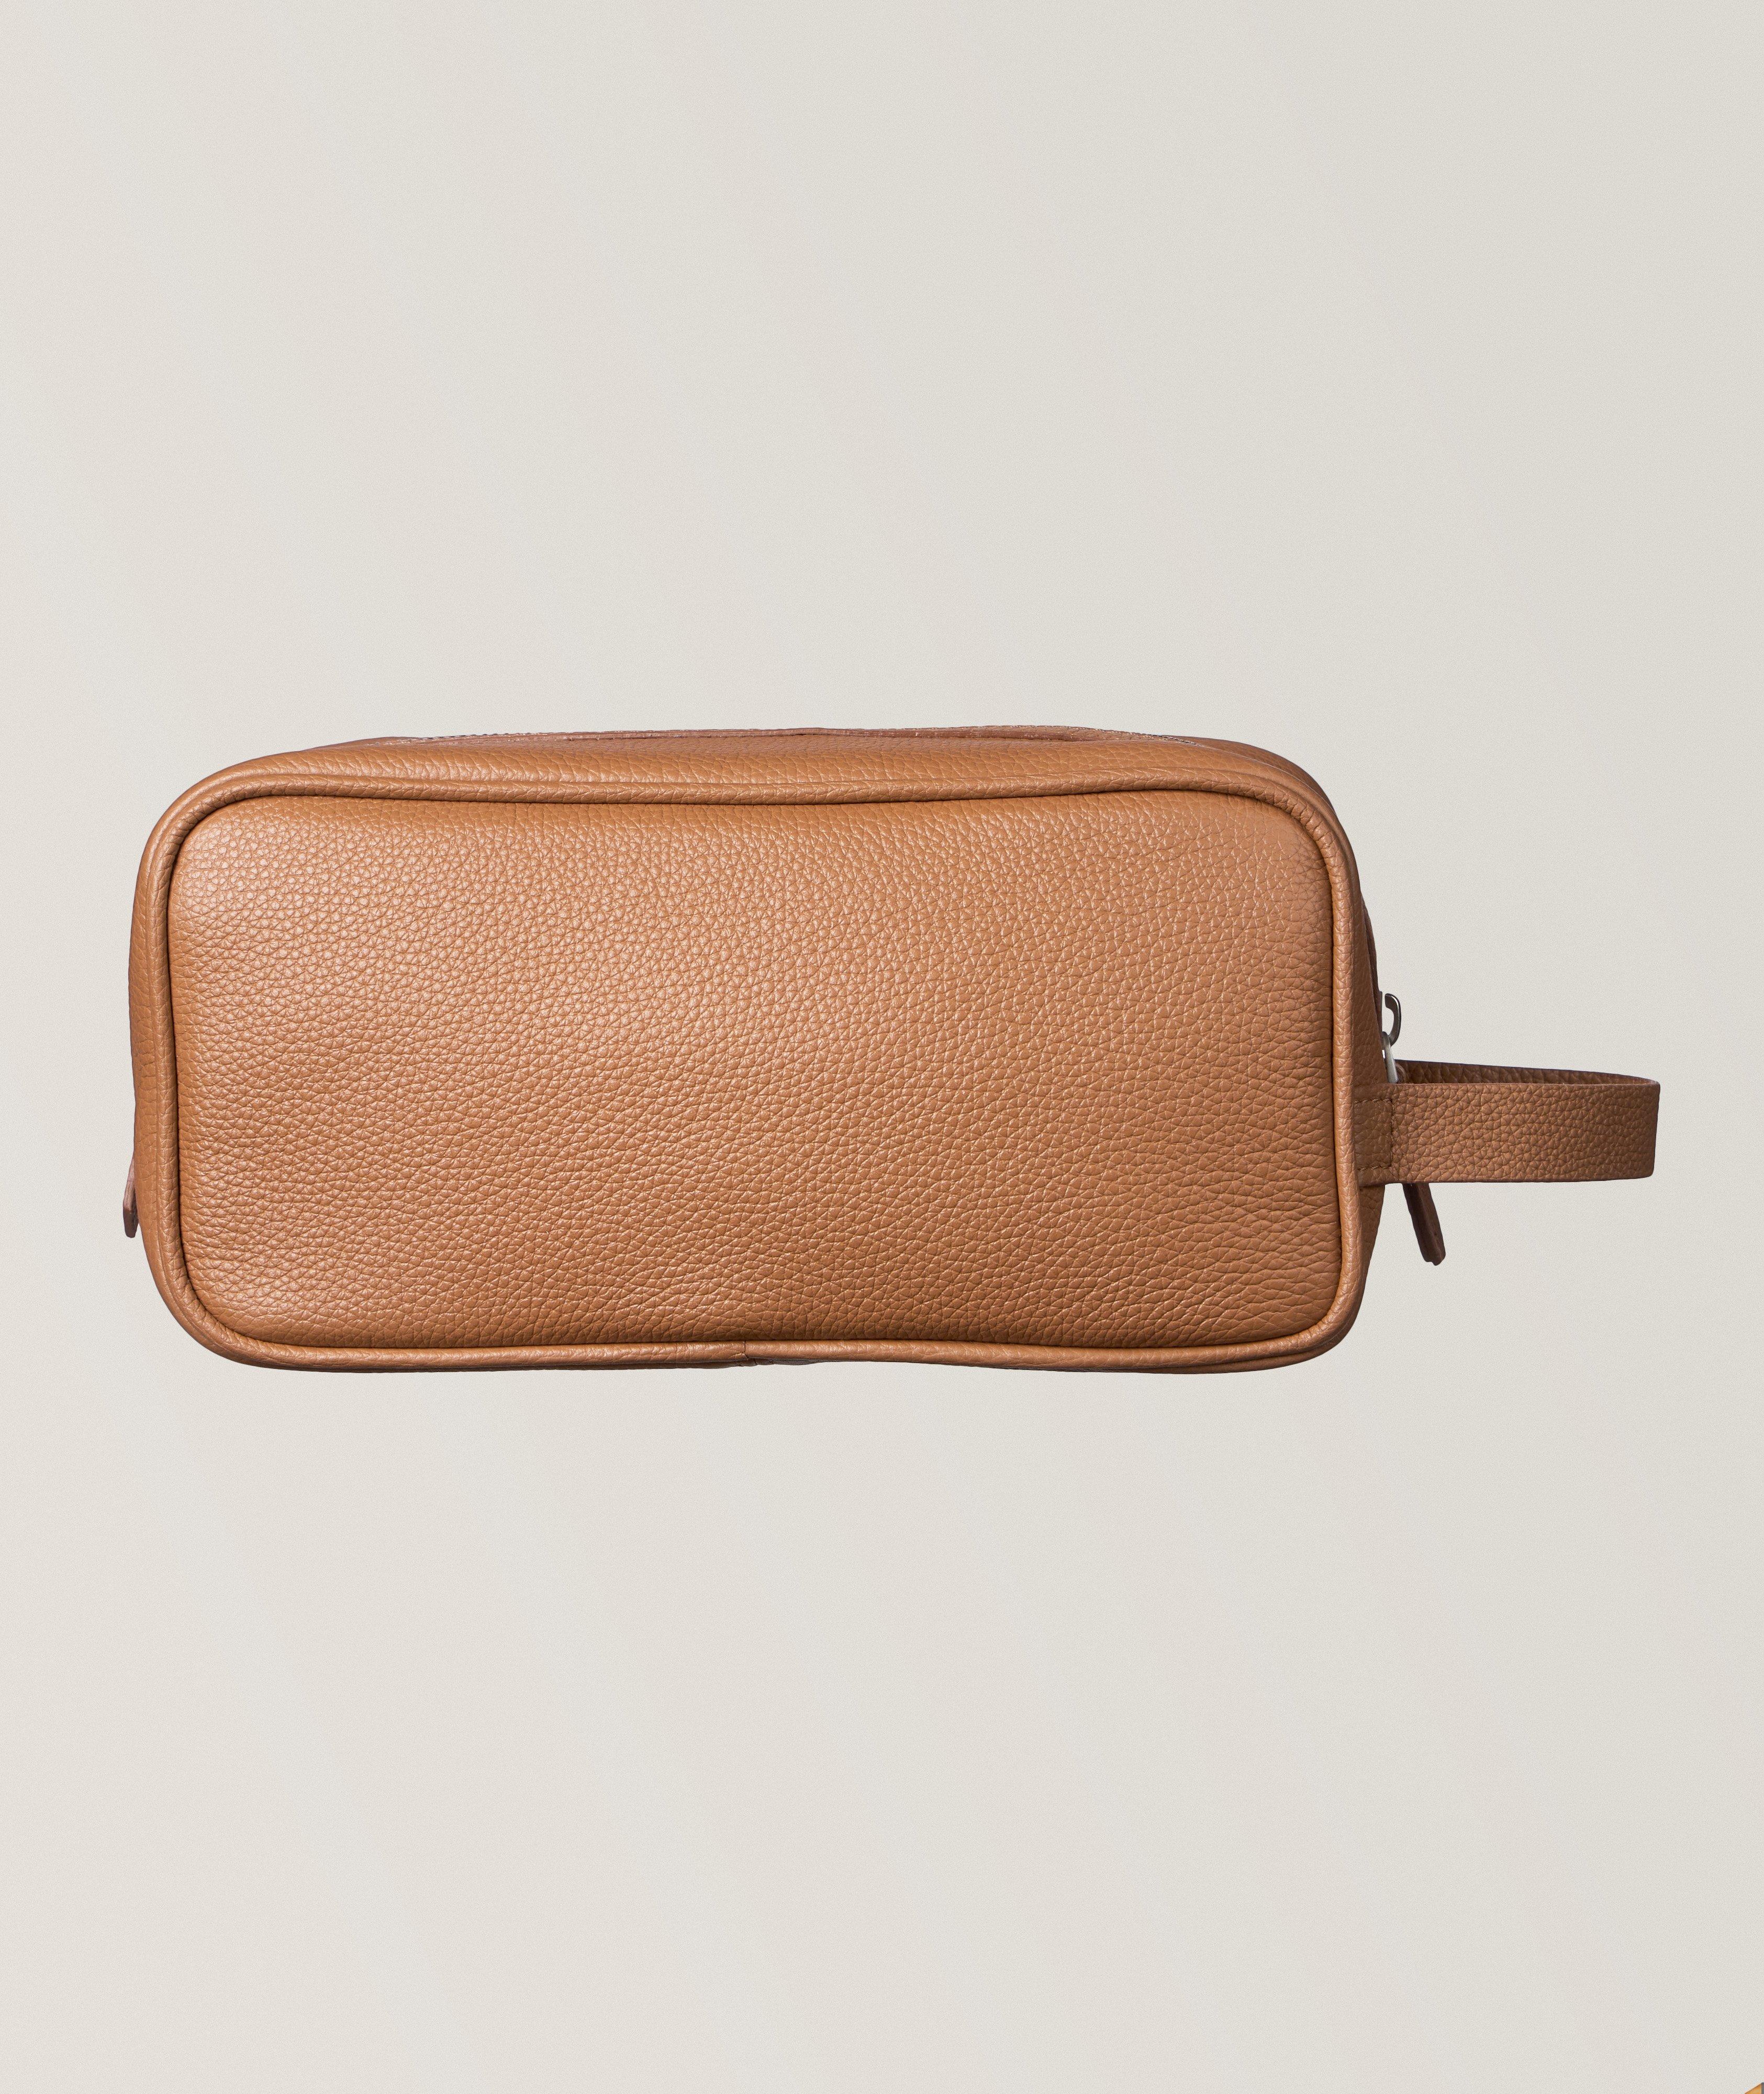 Grained Leather Toiletry Bag  image 1